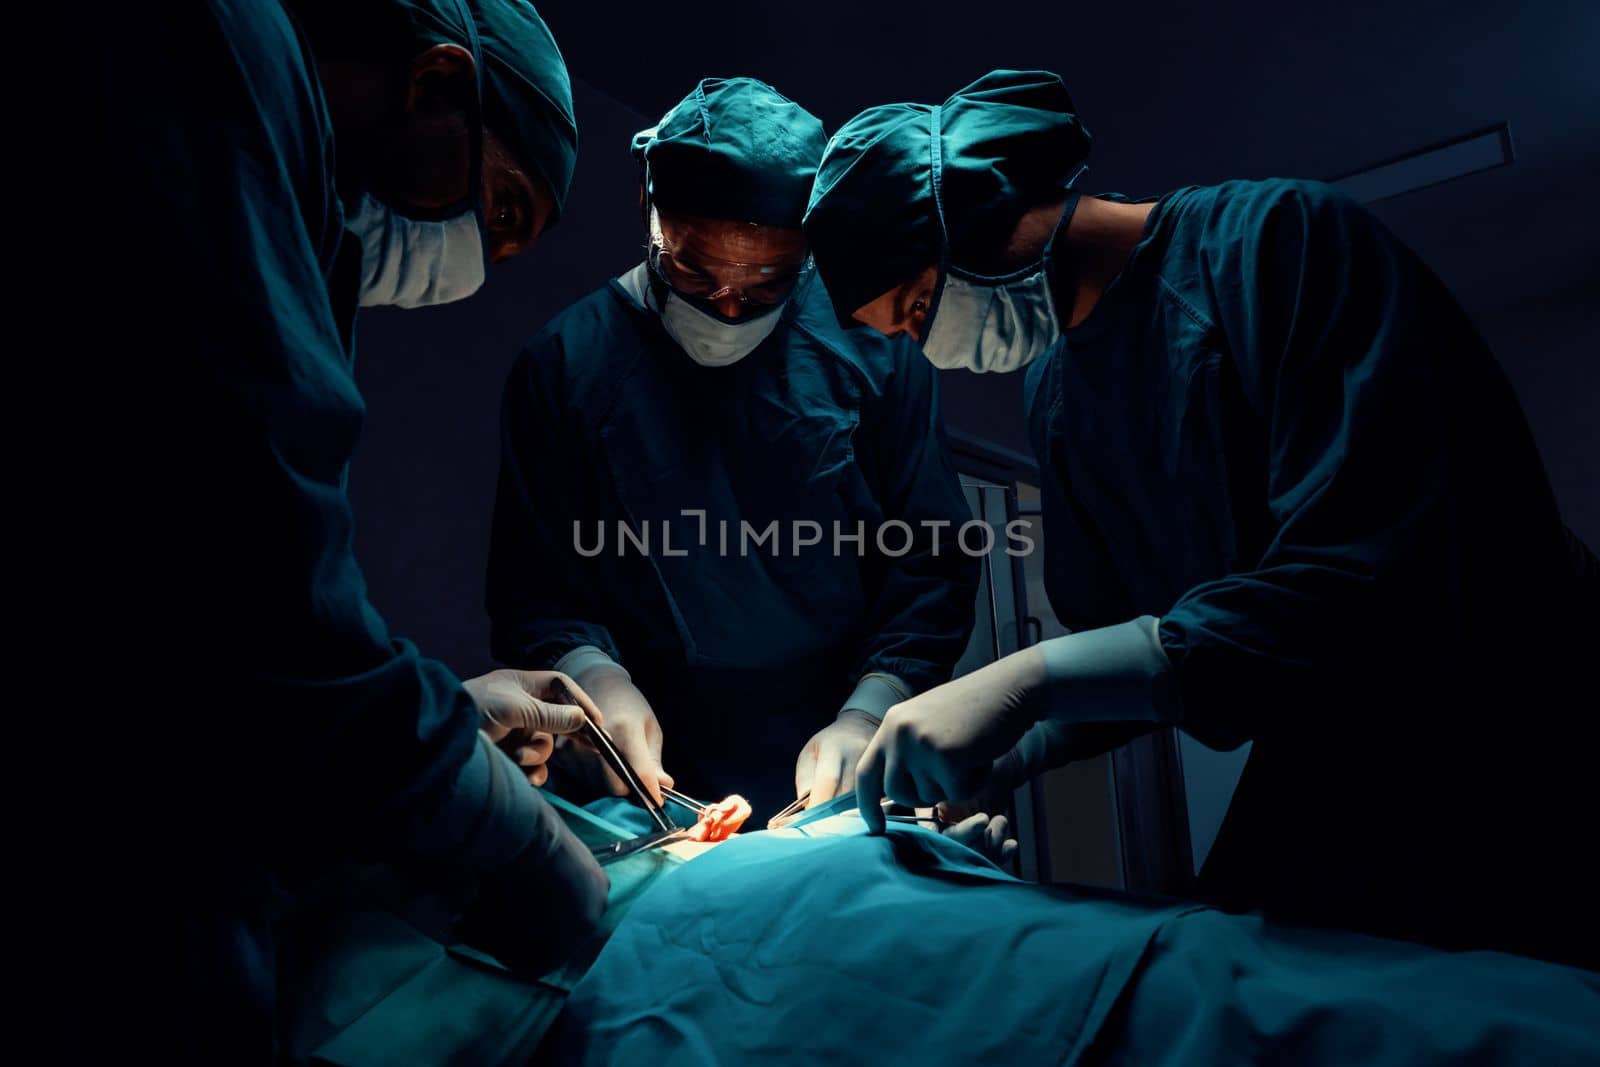 Surgical team performing surgery to patient in sterile operating room. by biancoblue